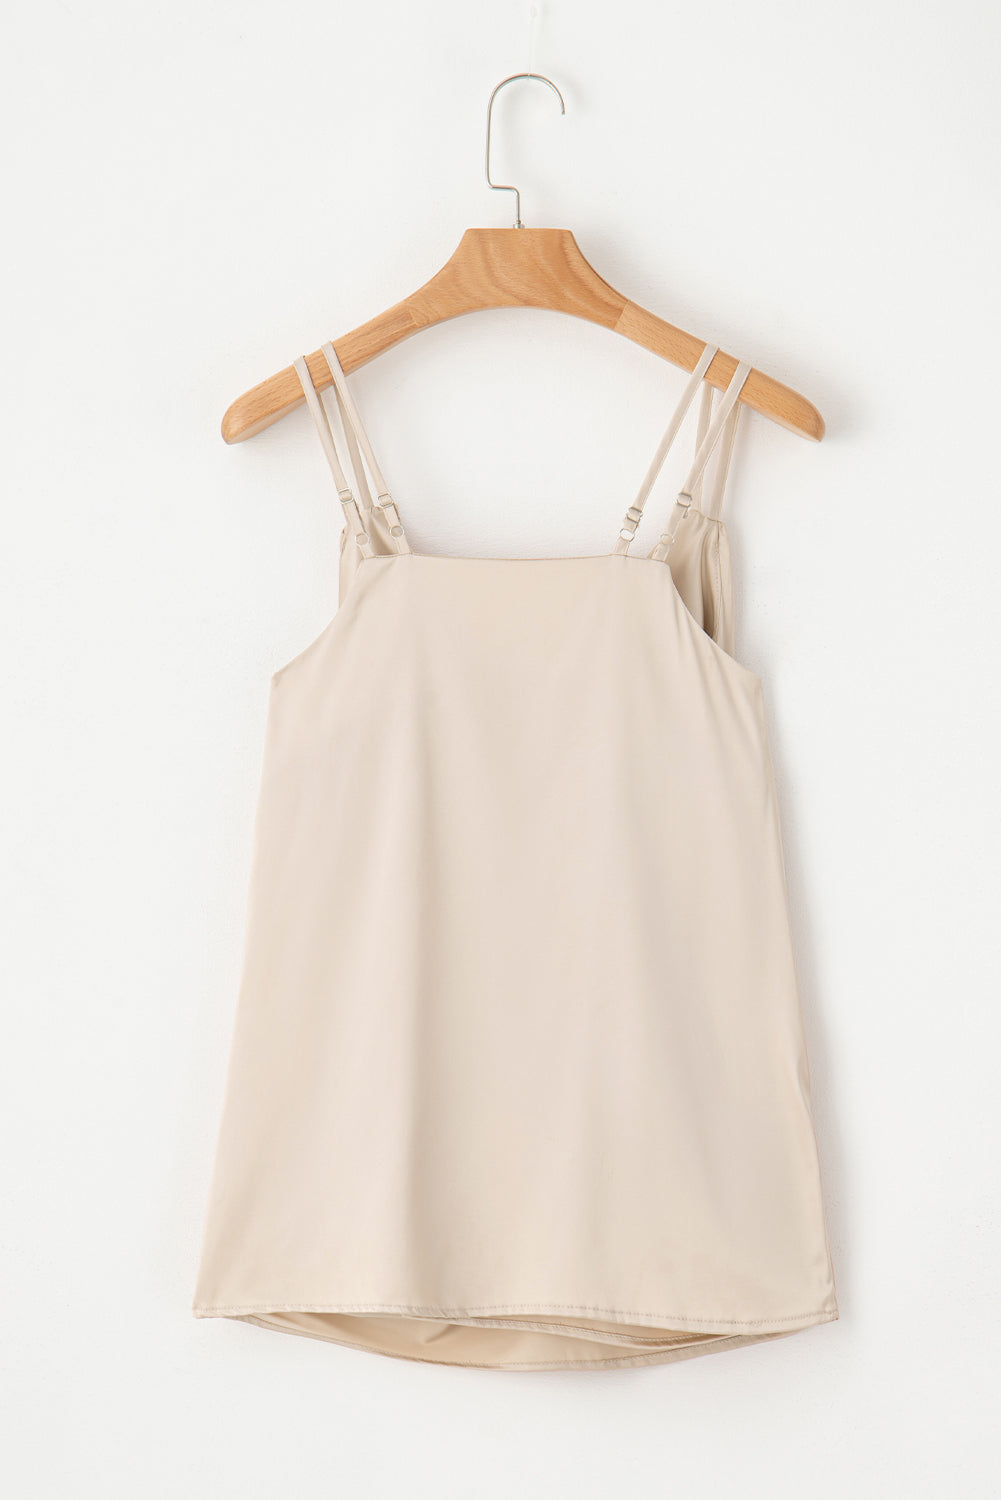 Apricot Wrap V Neck Ruched Satin Cami Top